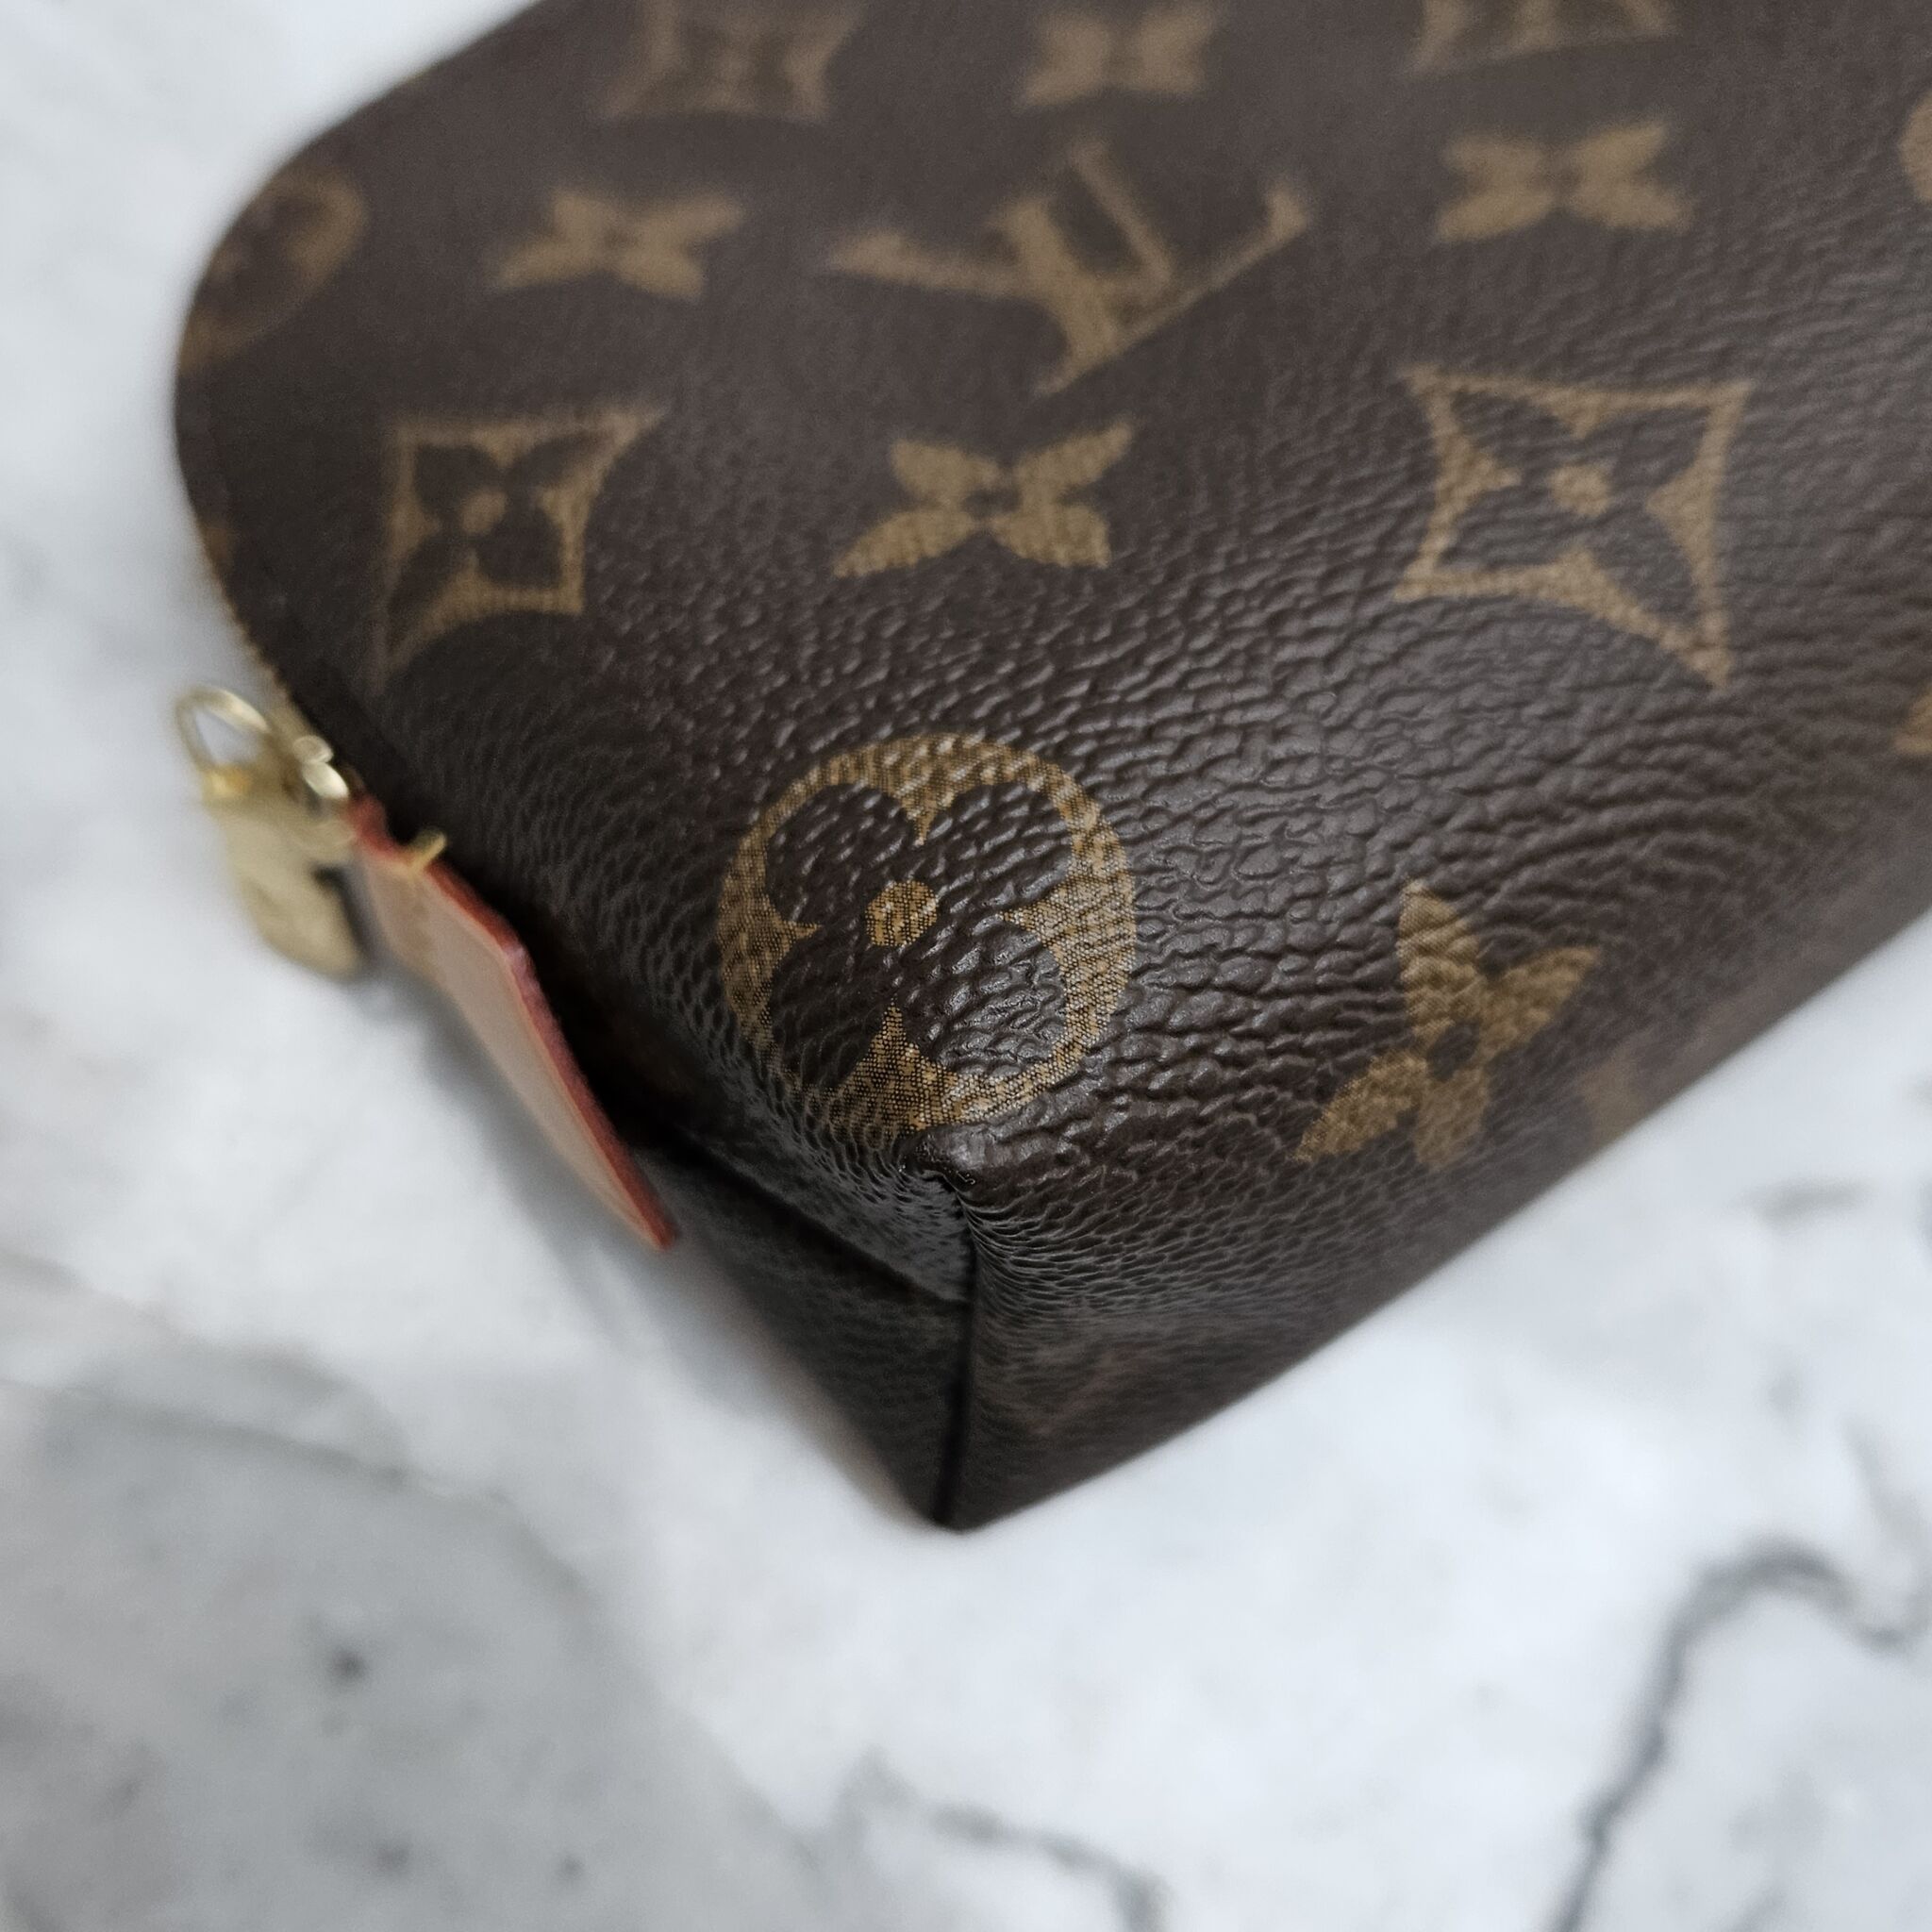 Louis Vuitton Cosmetic Pouch MM, Canvas, Mono - Laulay Luxury